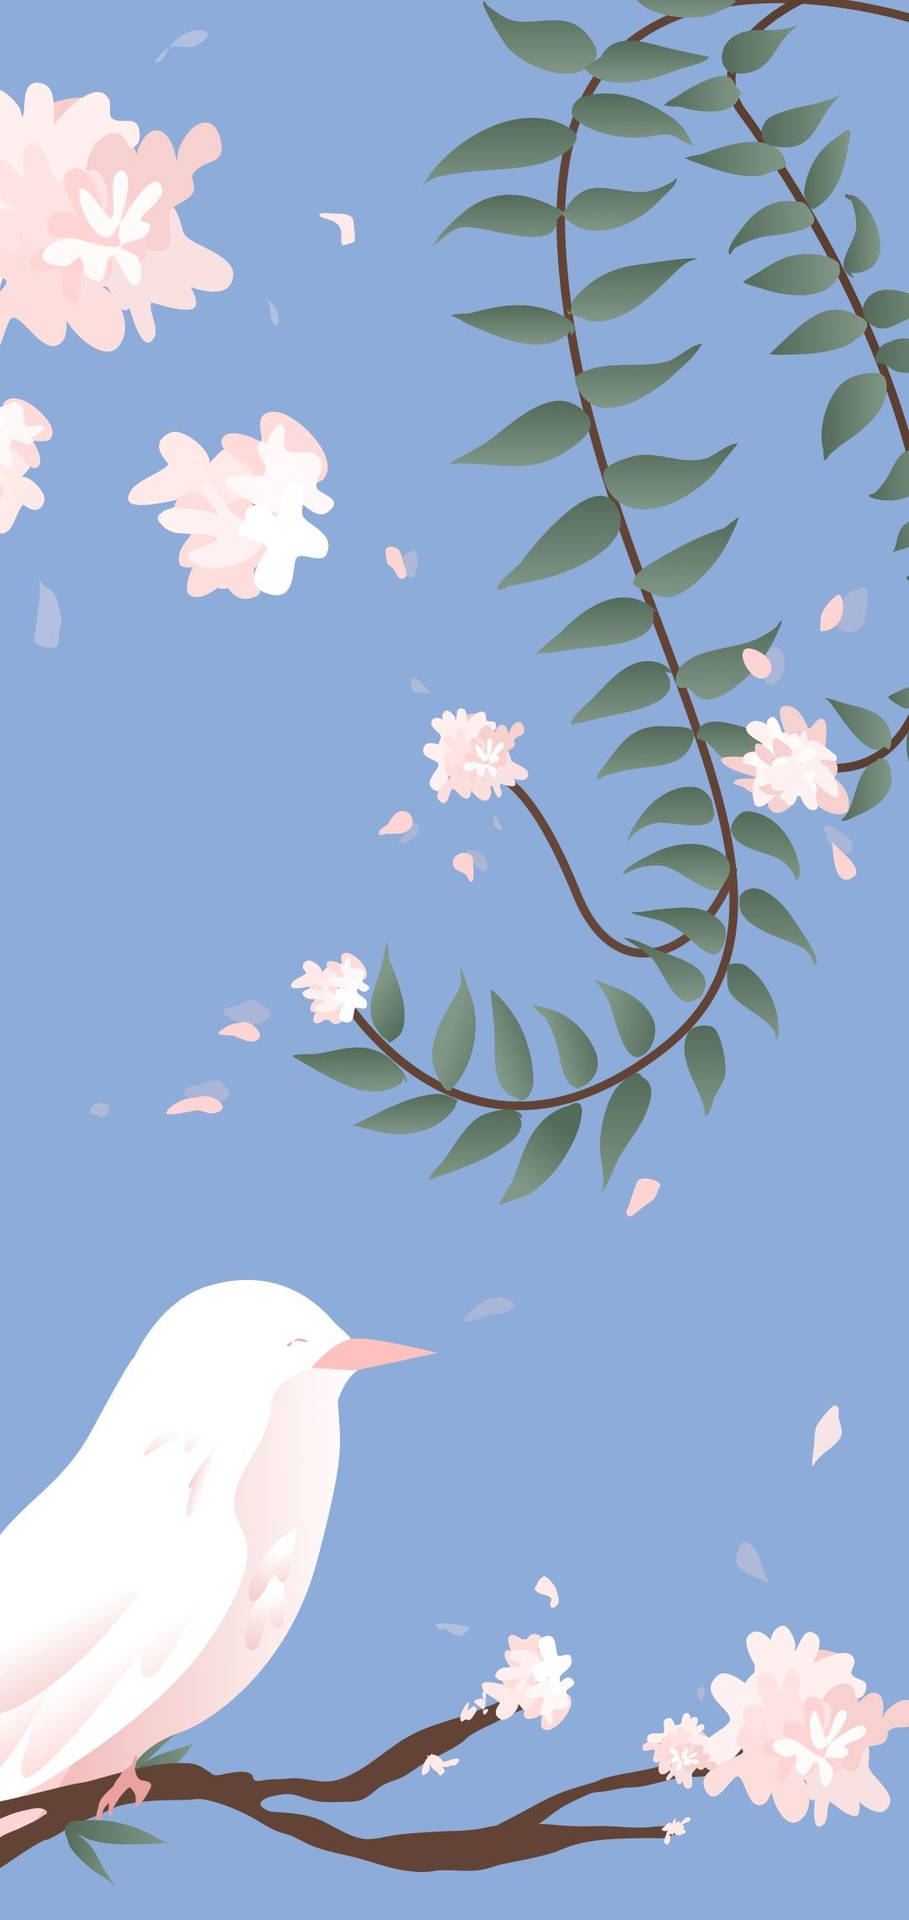 Periwinkle Bird Floral Art Background